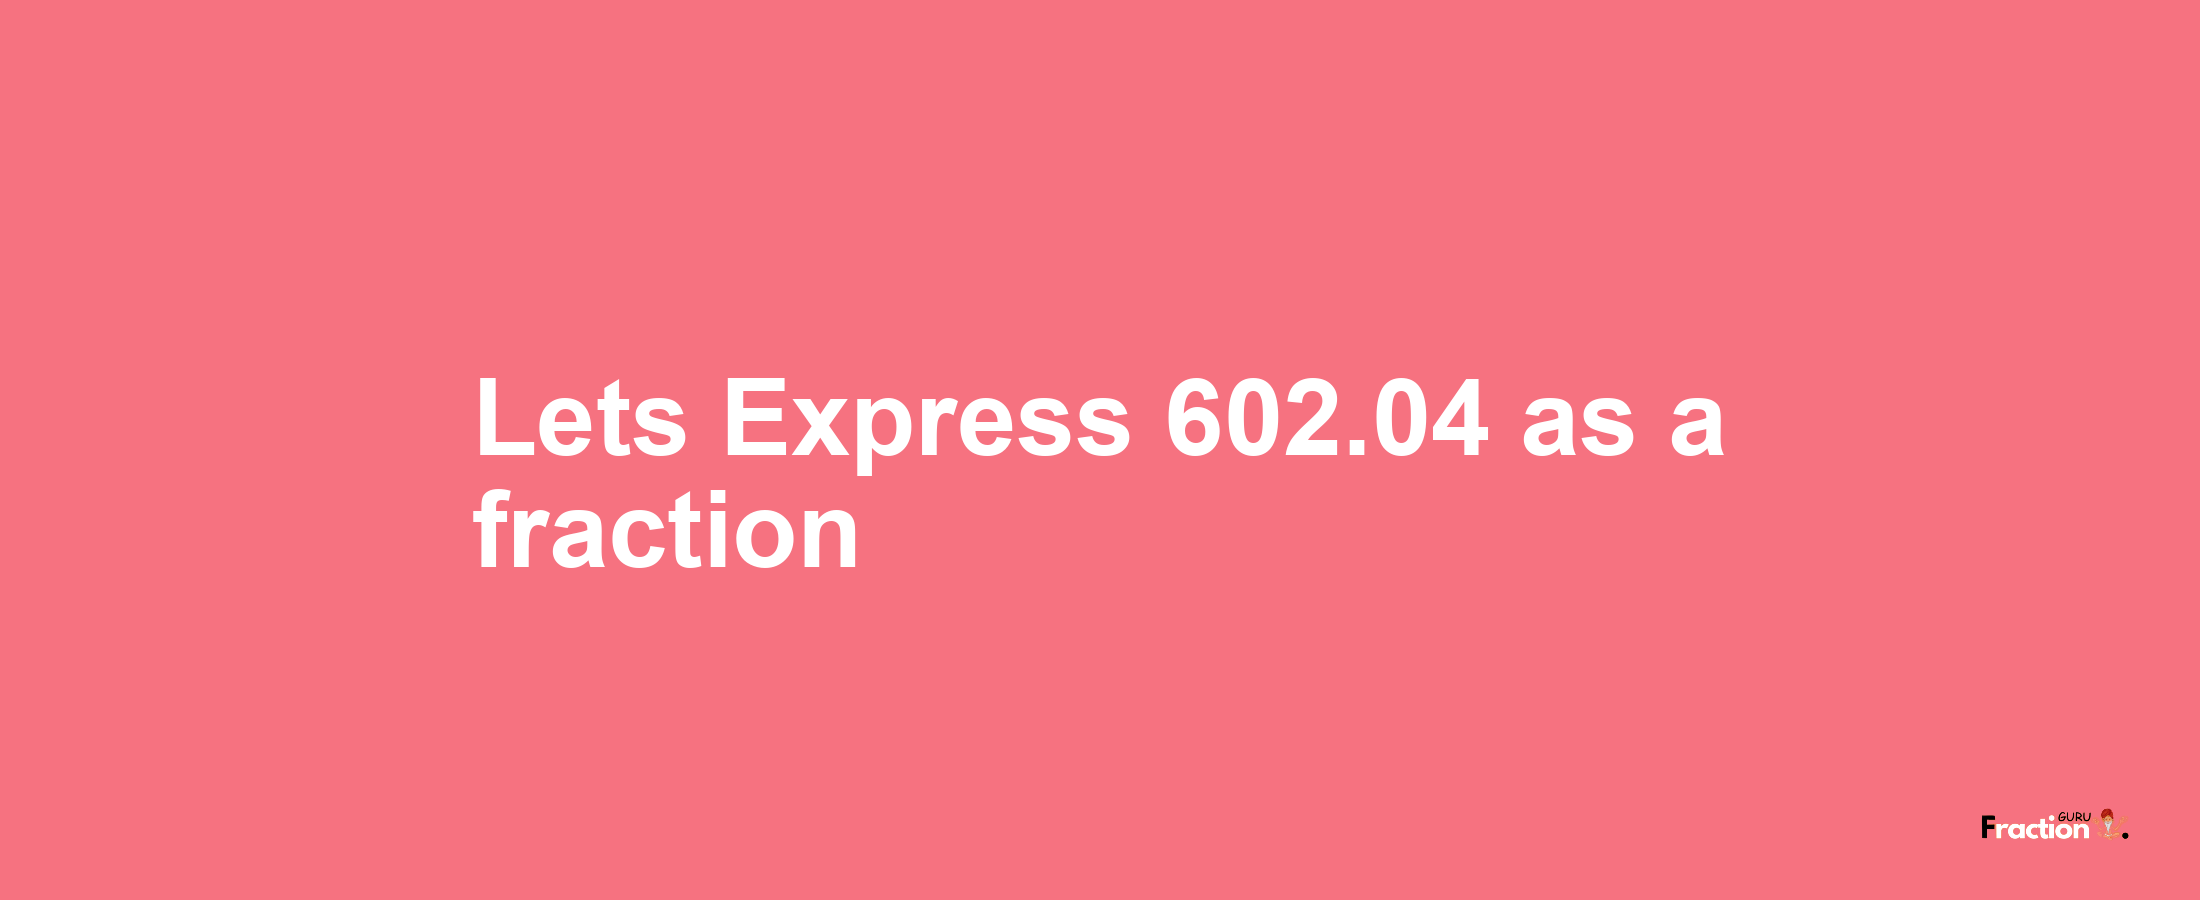 Lets Express 602.04 as afraction